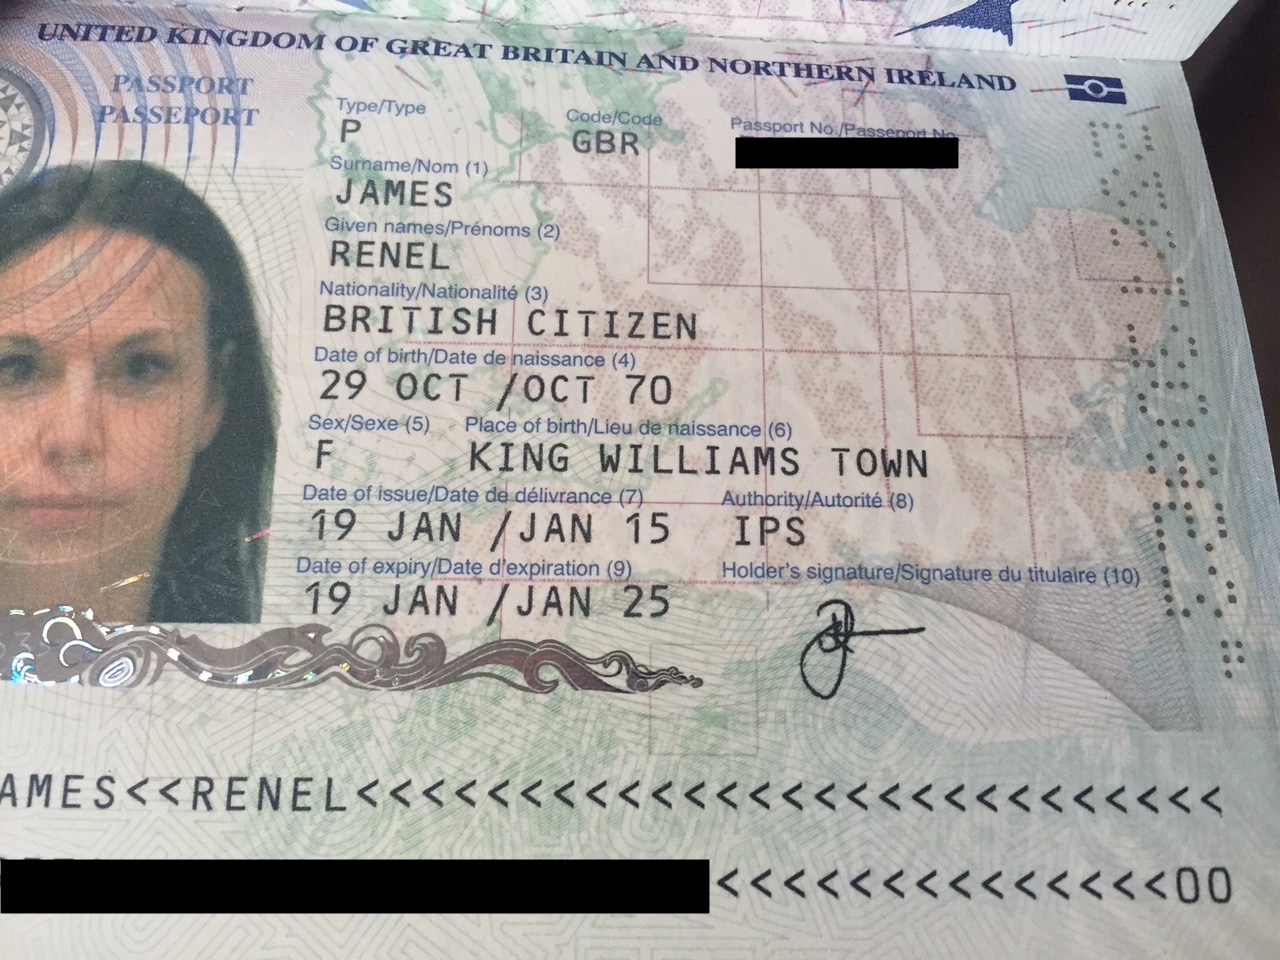 Renel James Passport and Picture